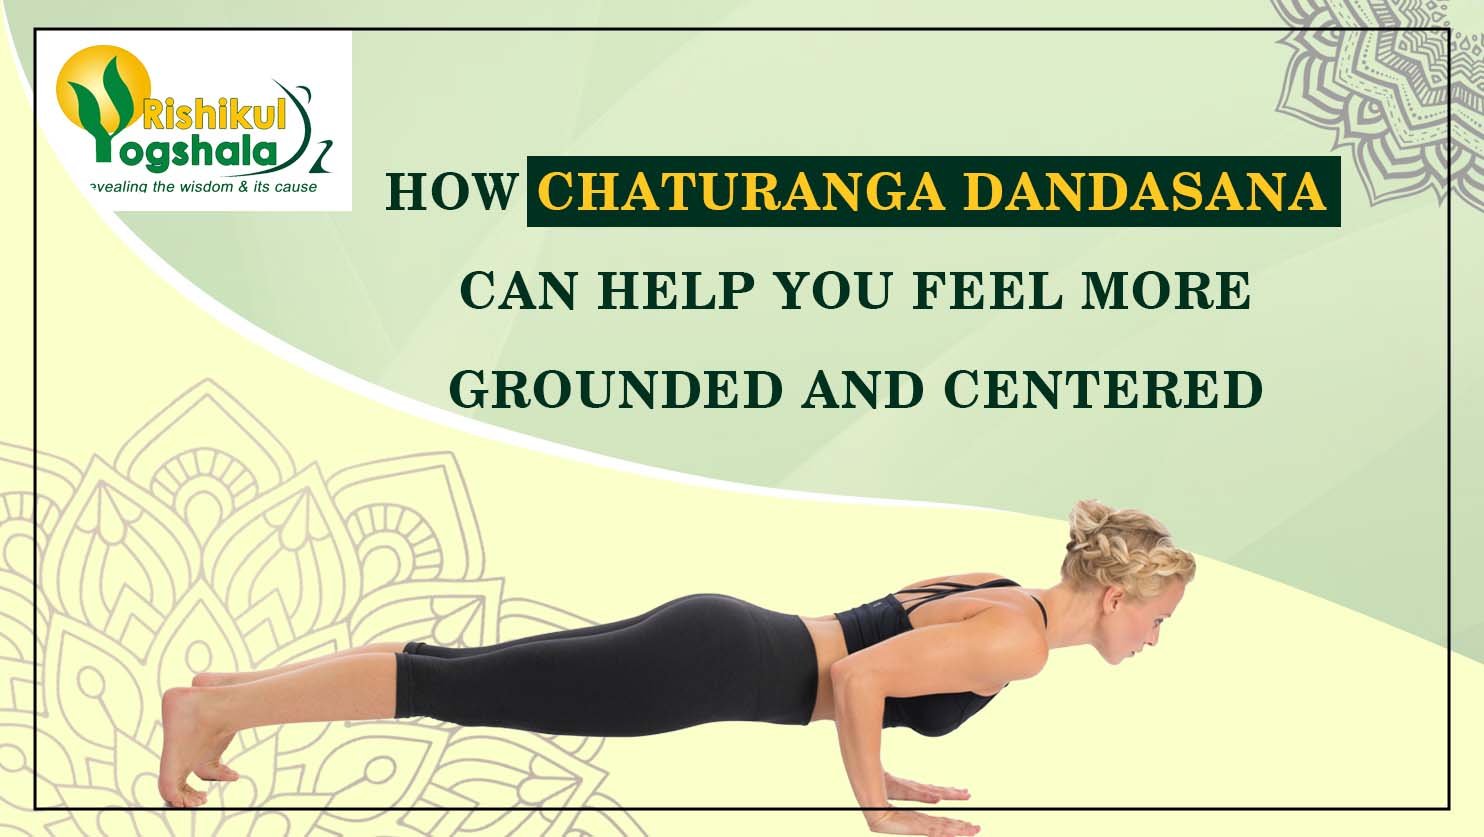 How Chaturanga Dandasana can help you feel more grounded and centered